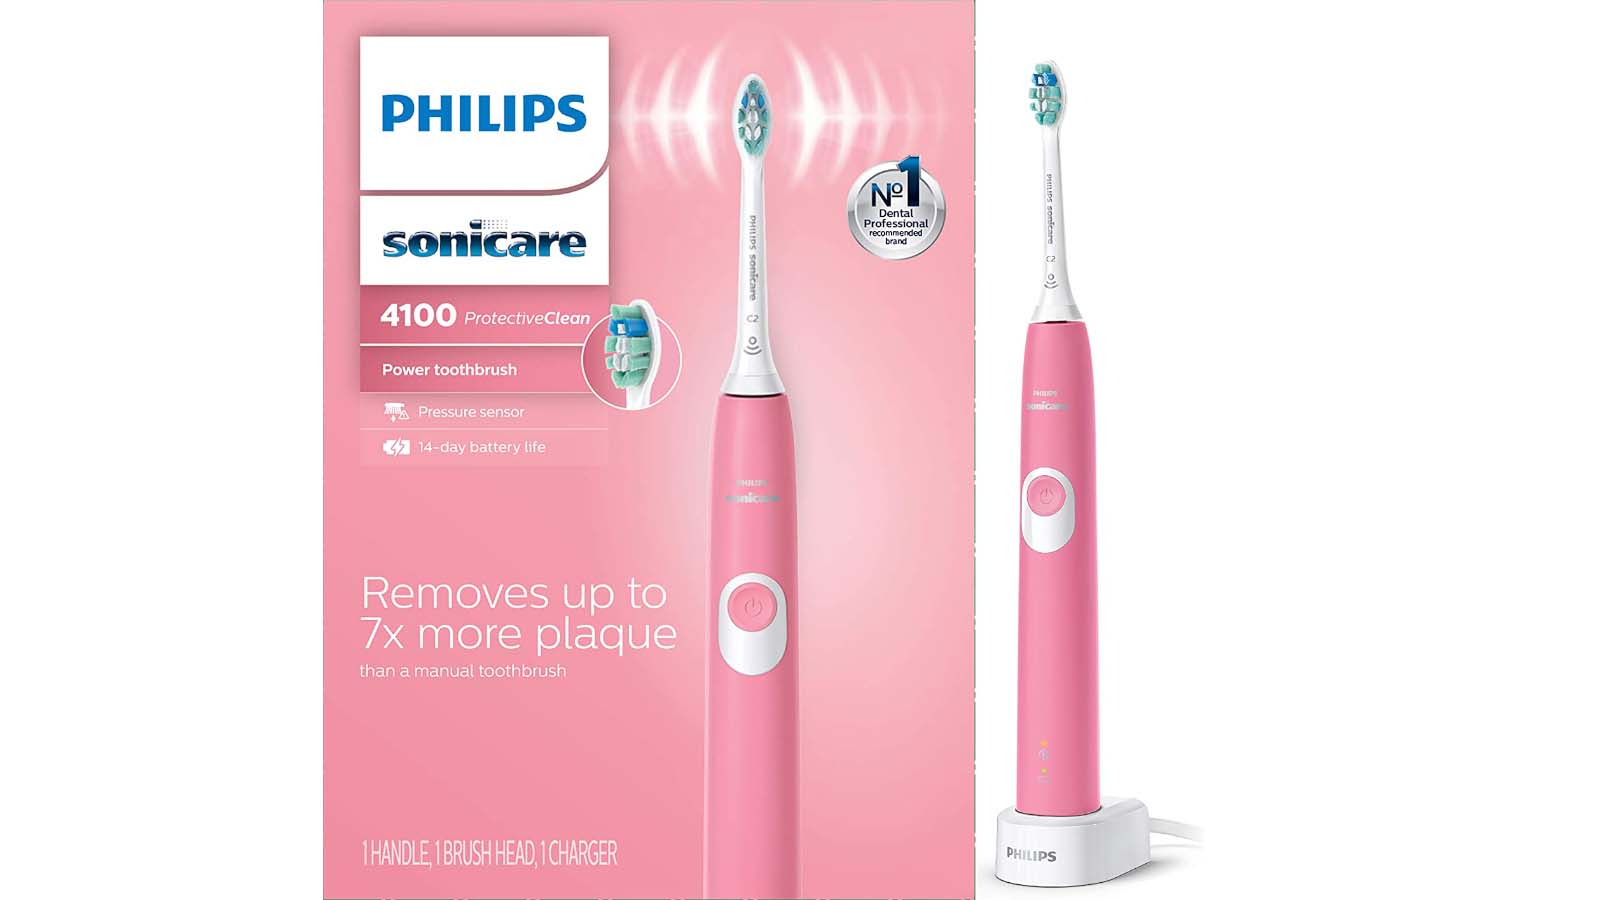 Review of Philips Sonicare 4100 - Philips Sonicare ProtectiveClean 4100 (Deep Pink, HX6815/01) toothbrush and its packaging